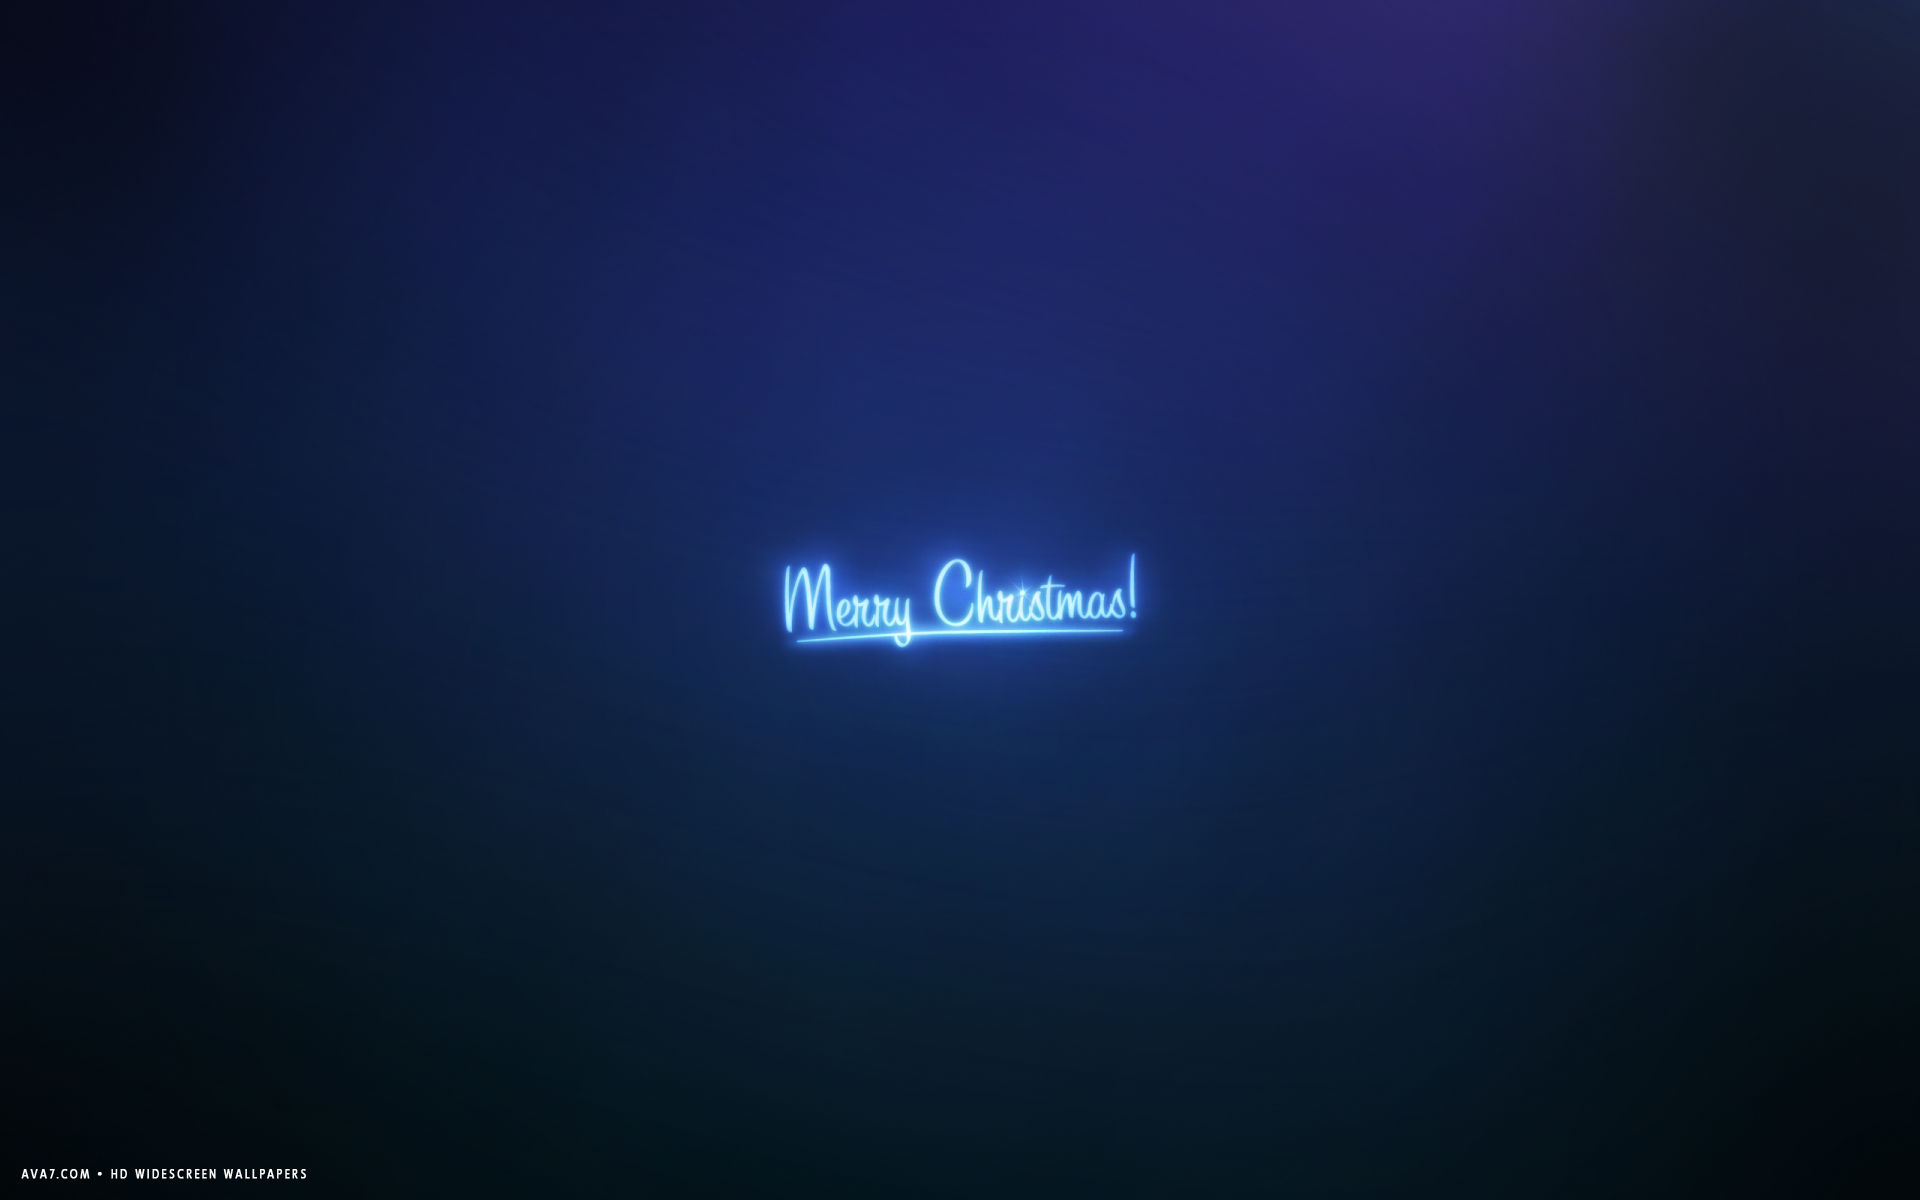 merry christmas simplicity blue minimalistic holiday hd widescreen wallpaper